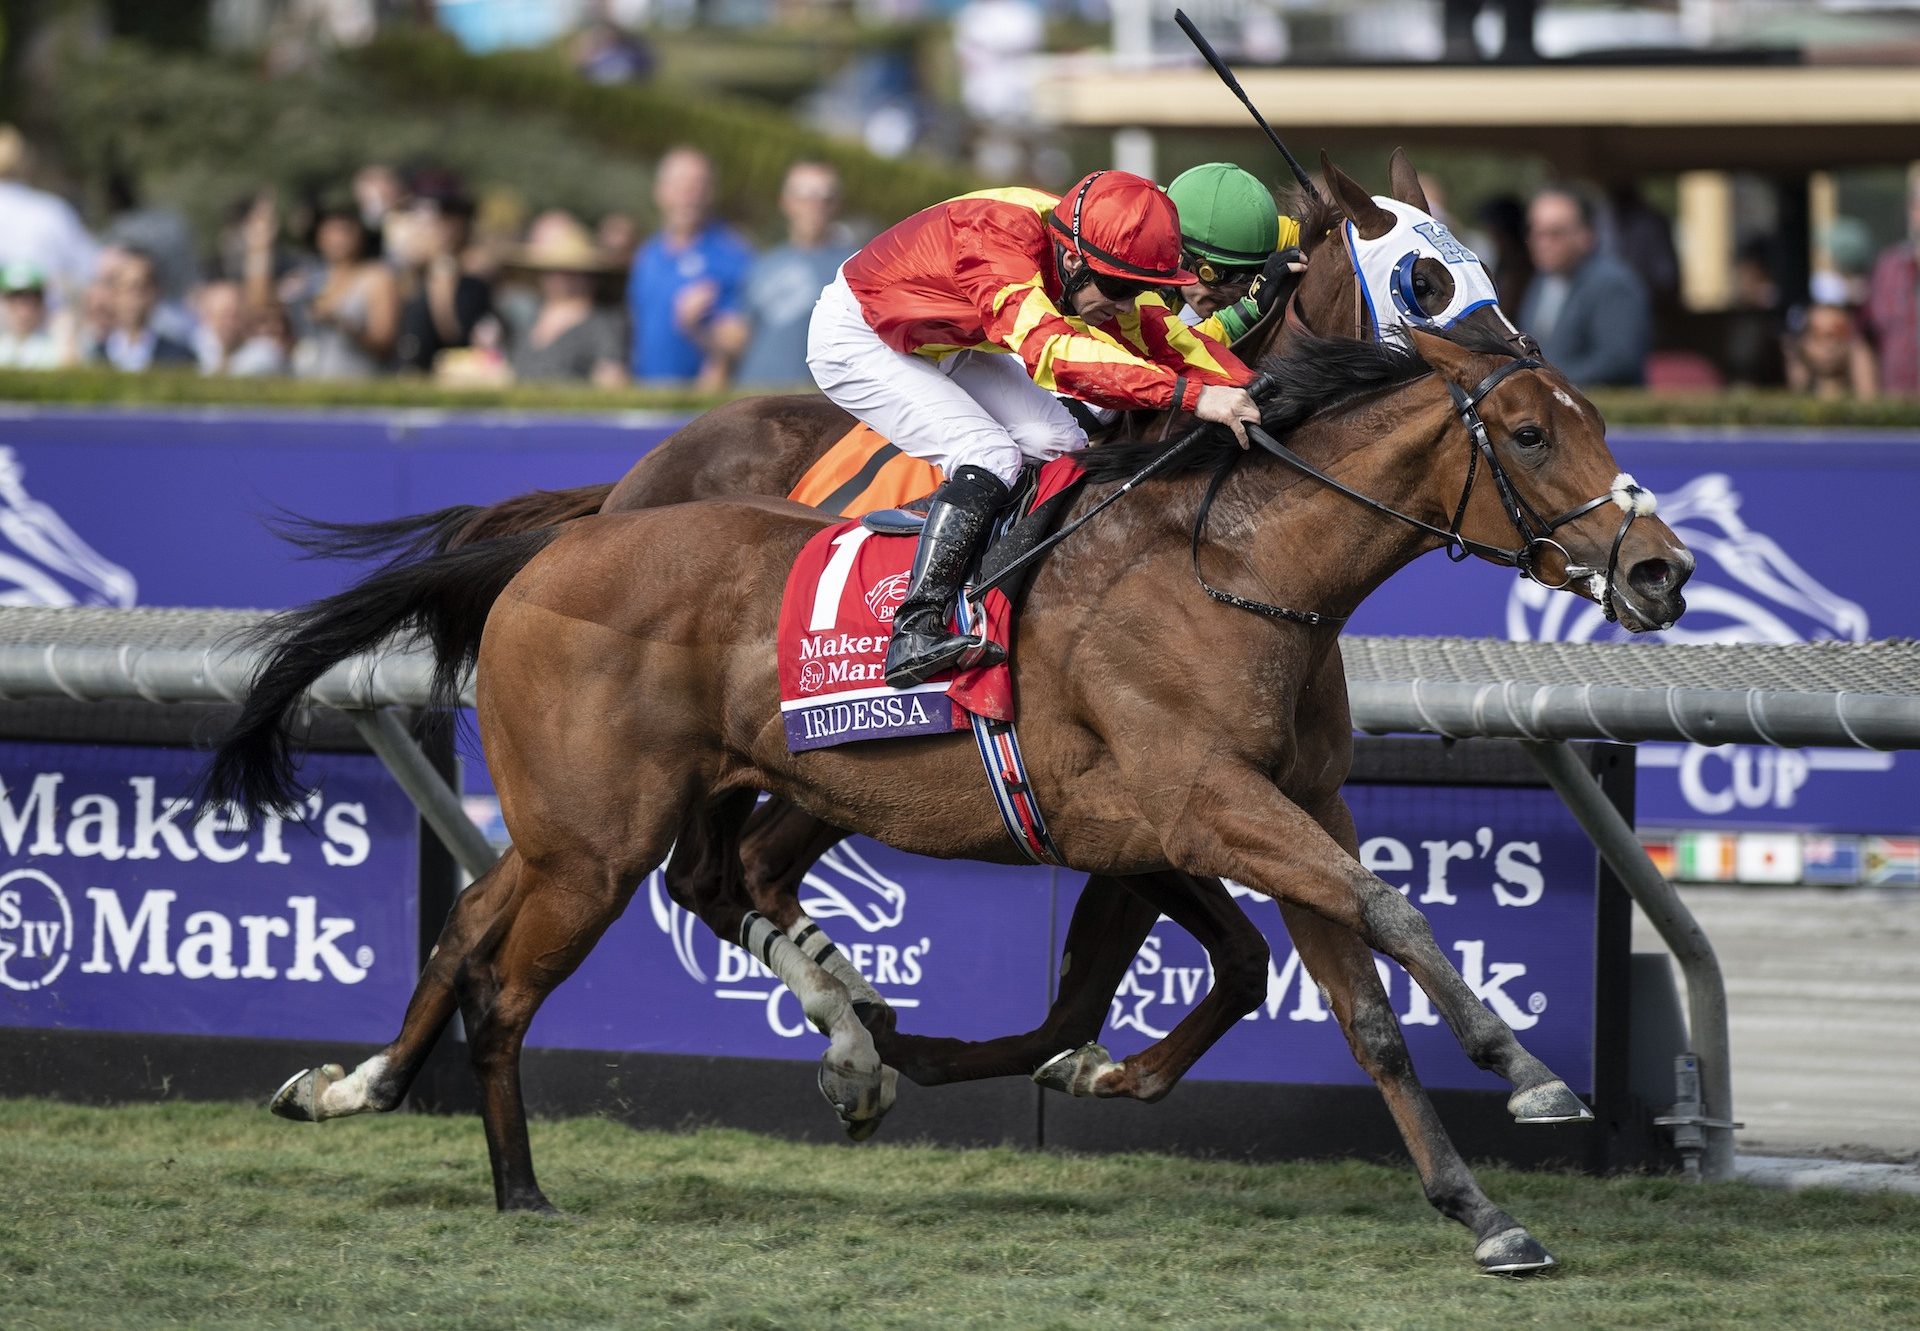 Iridessa (Ruler Of The World) Wins The Breeders Cup Fillies And Mares Turf at Santa Anita